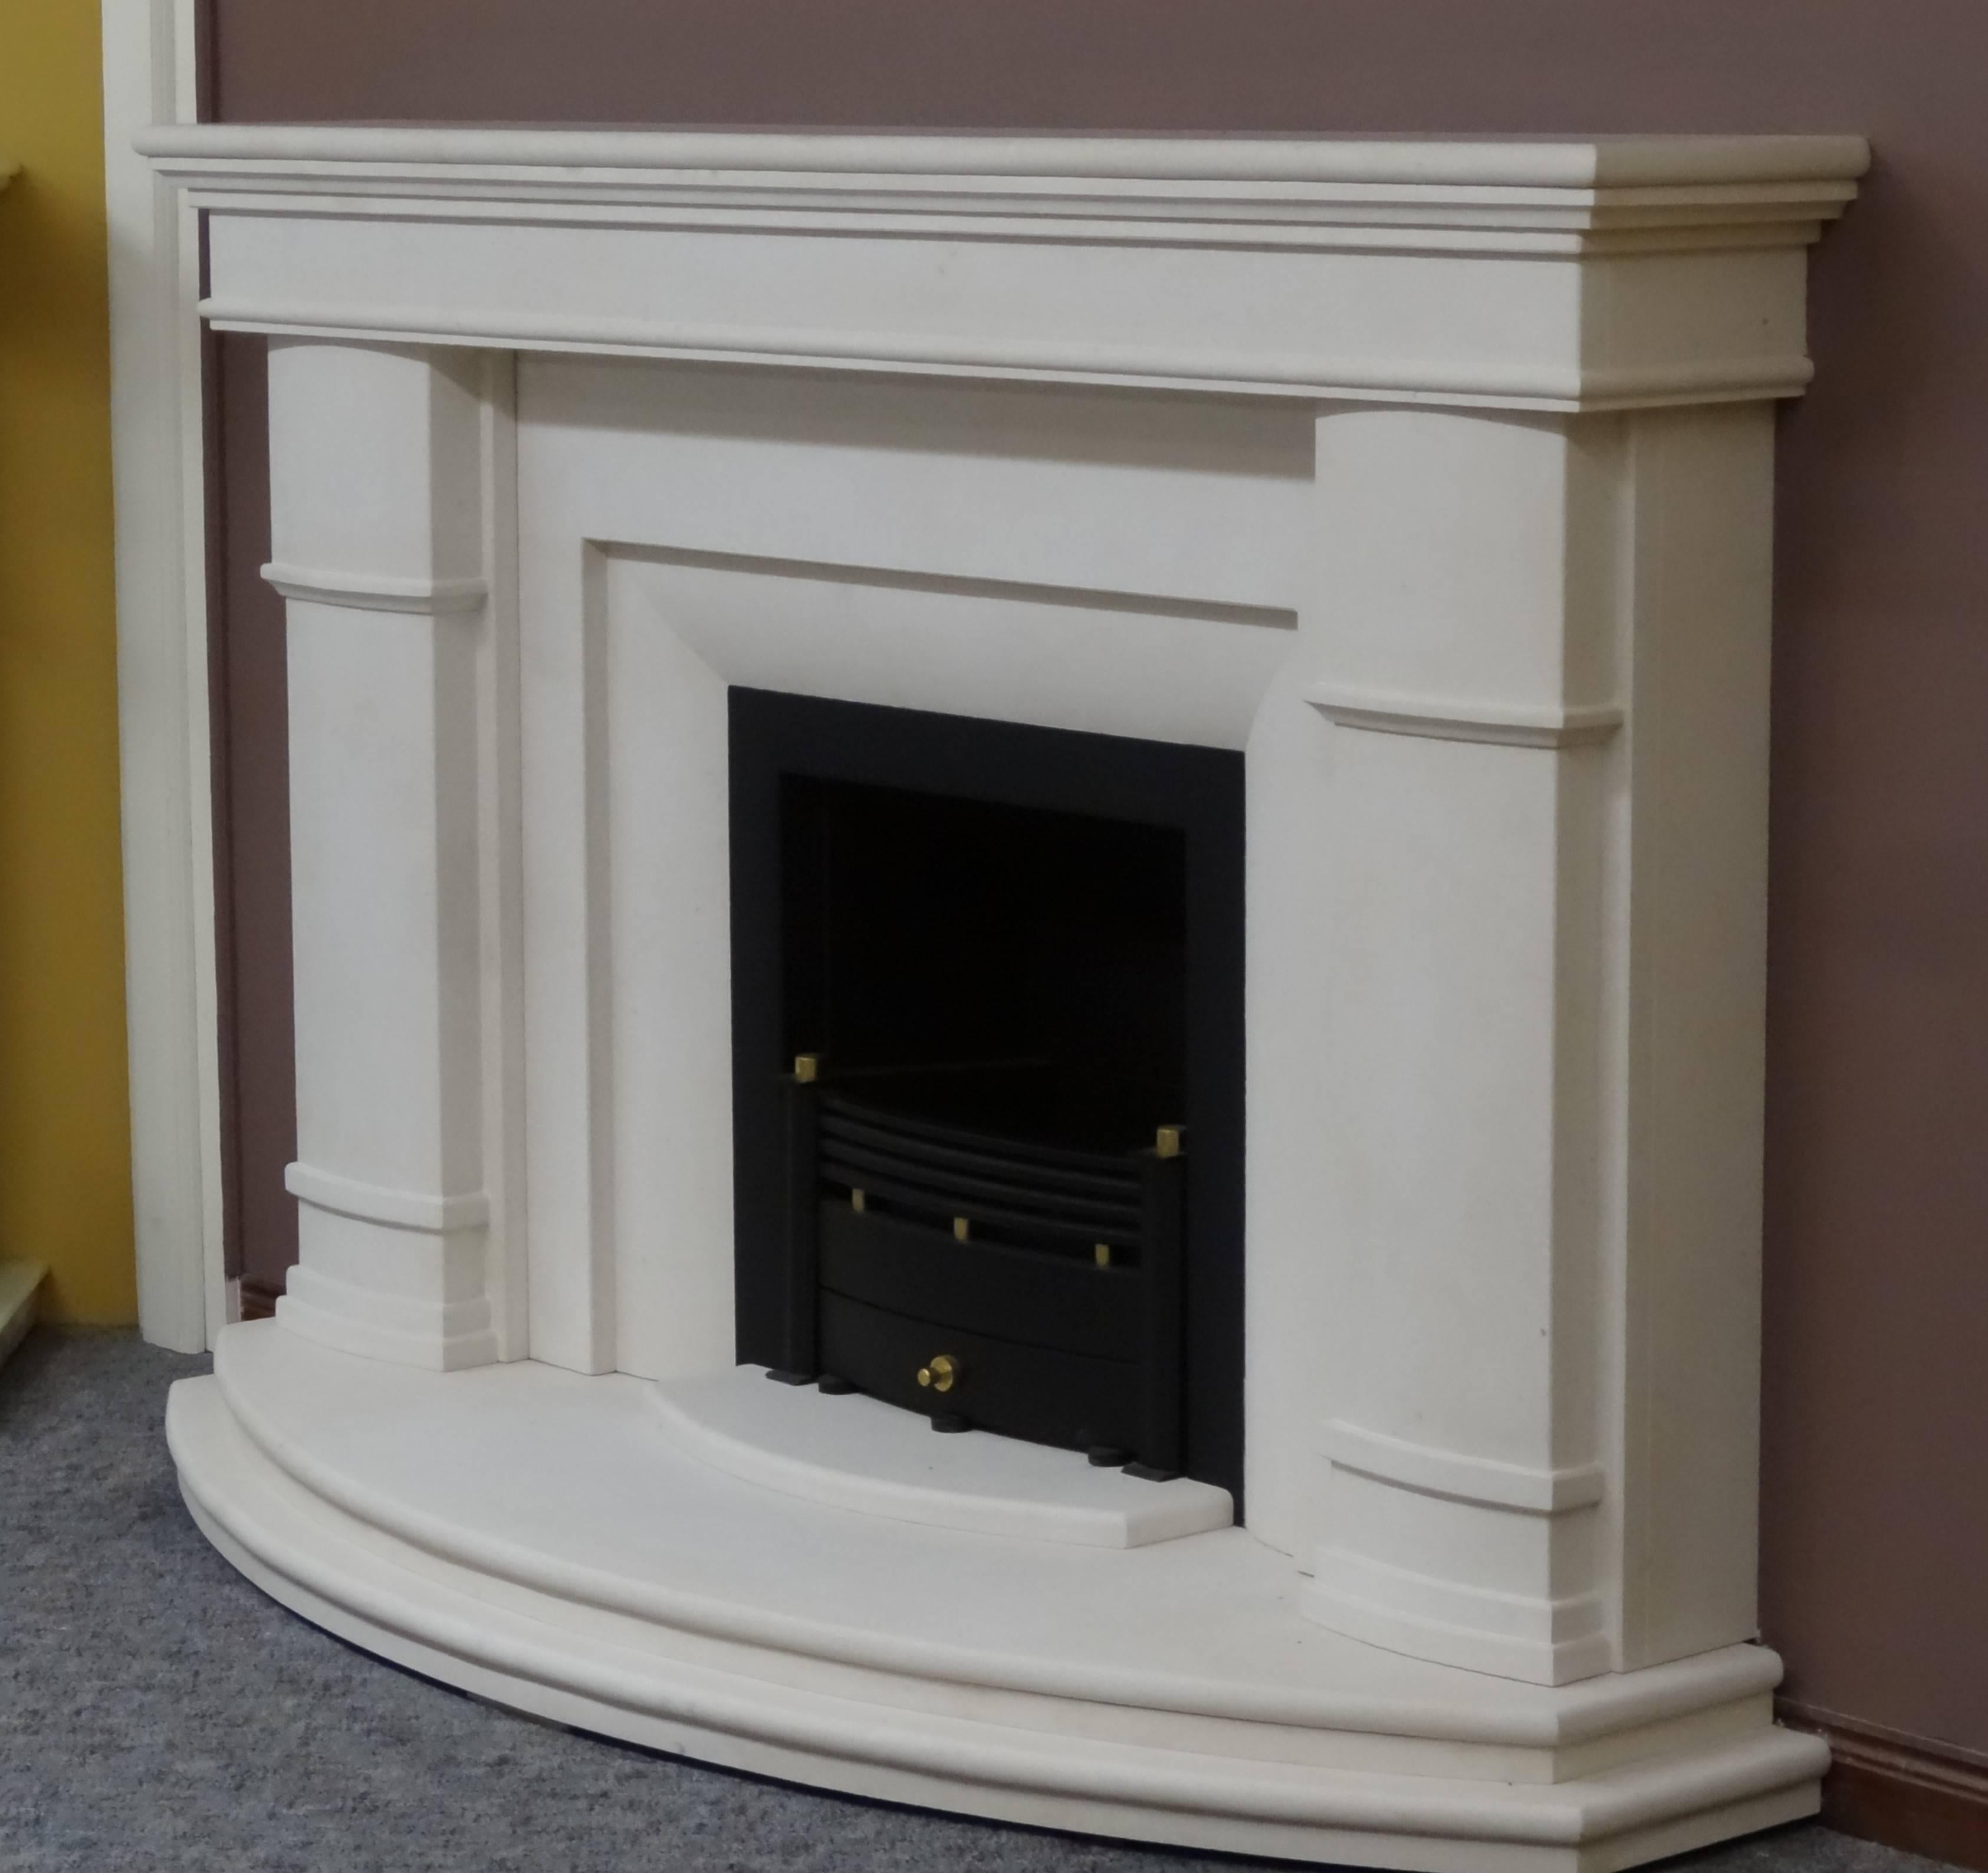 We created this fireplace from honed Portuguese limestone. The fireplace features curved hearths, jambs and insert. Fireplace comprises matching curved hearths, black metal trim built in to the insert and the removable black and brass fire